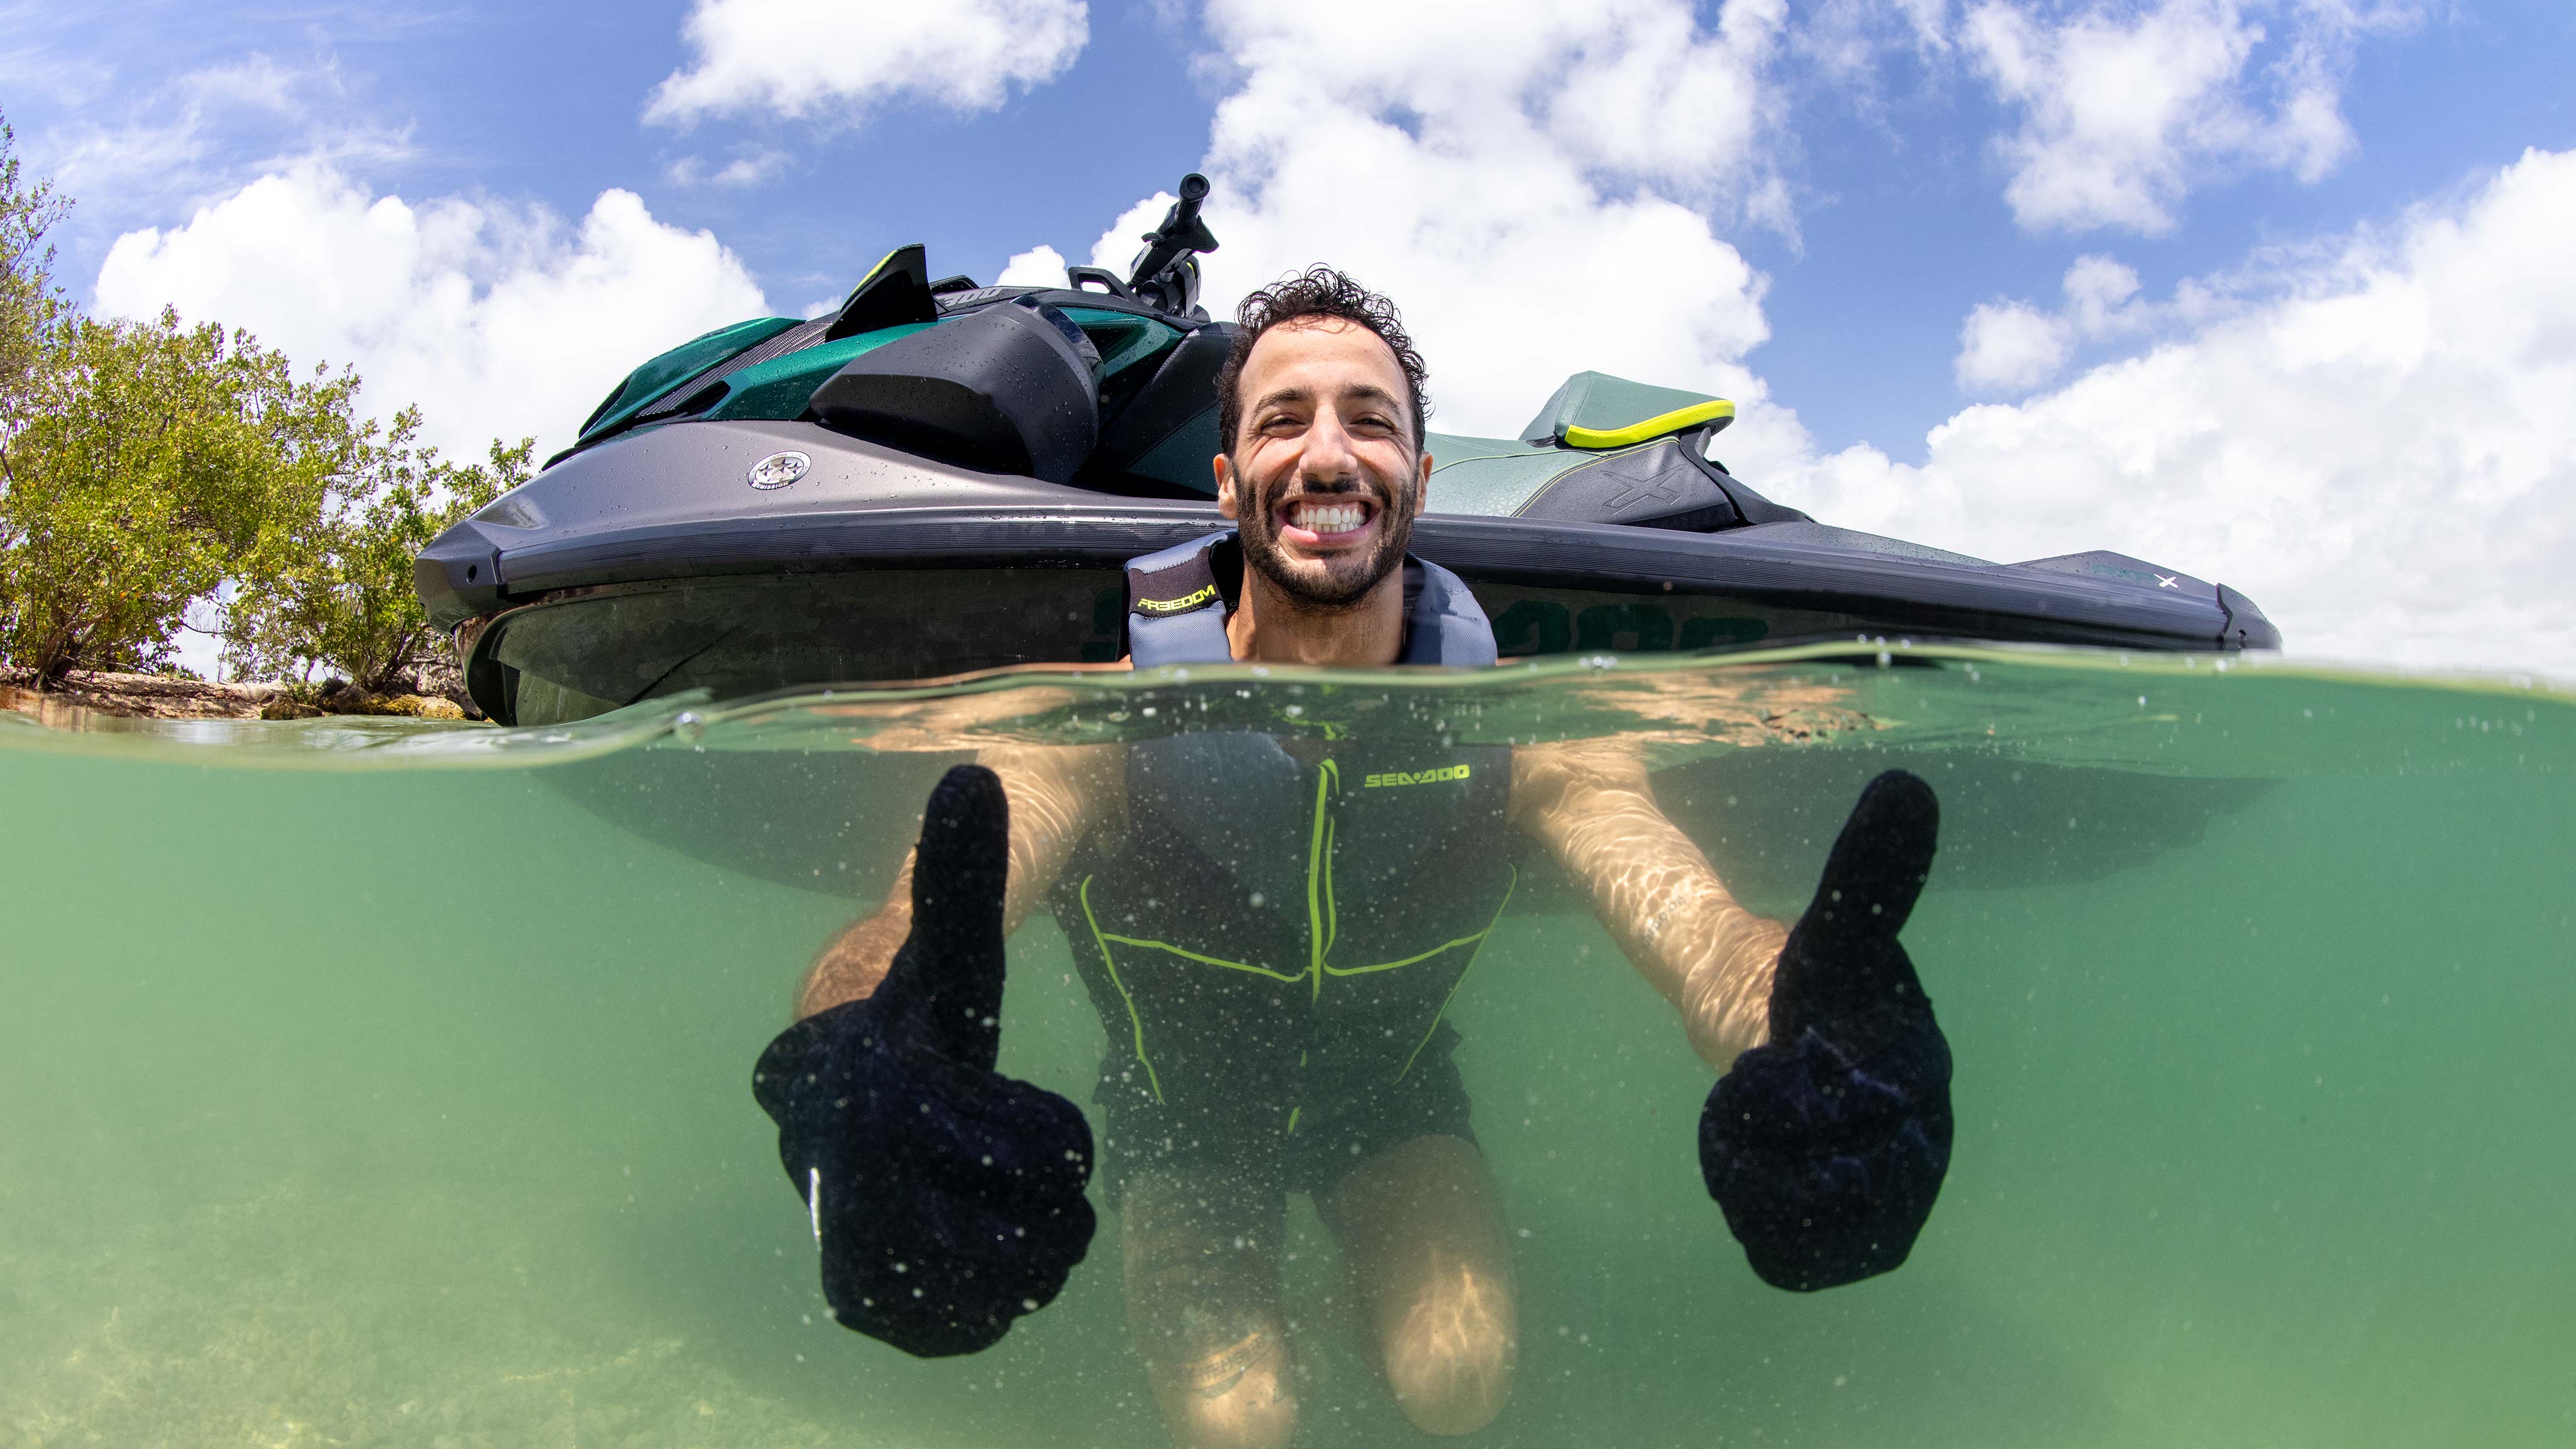 Daniel Ricciardo in the water giving two thumbs up for the new Sea-Doo